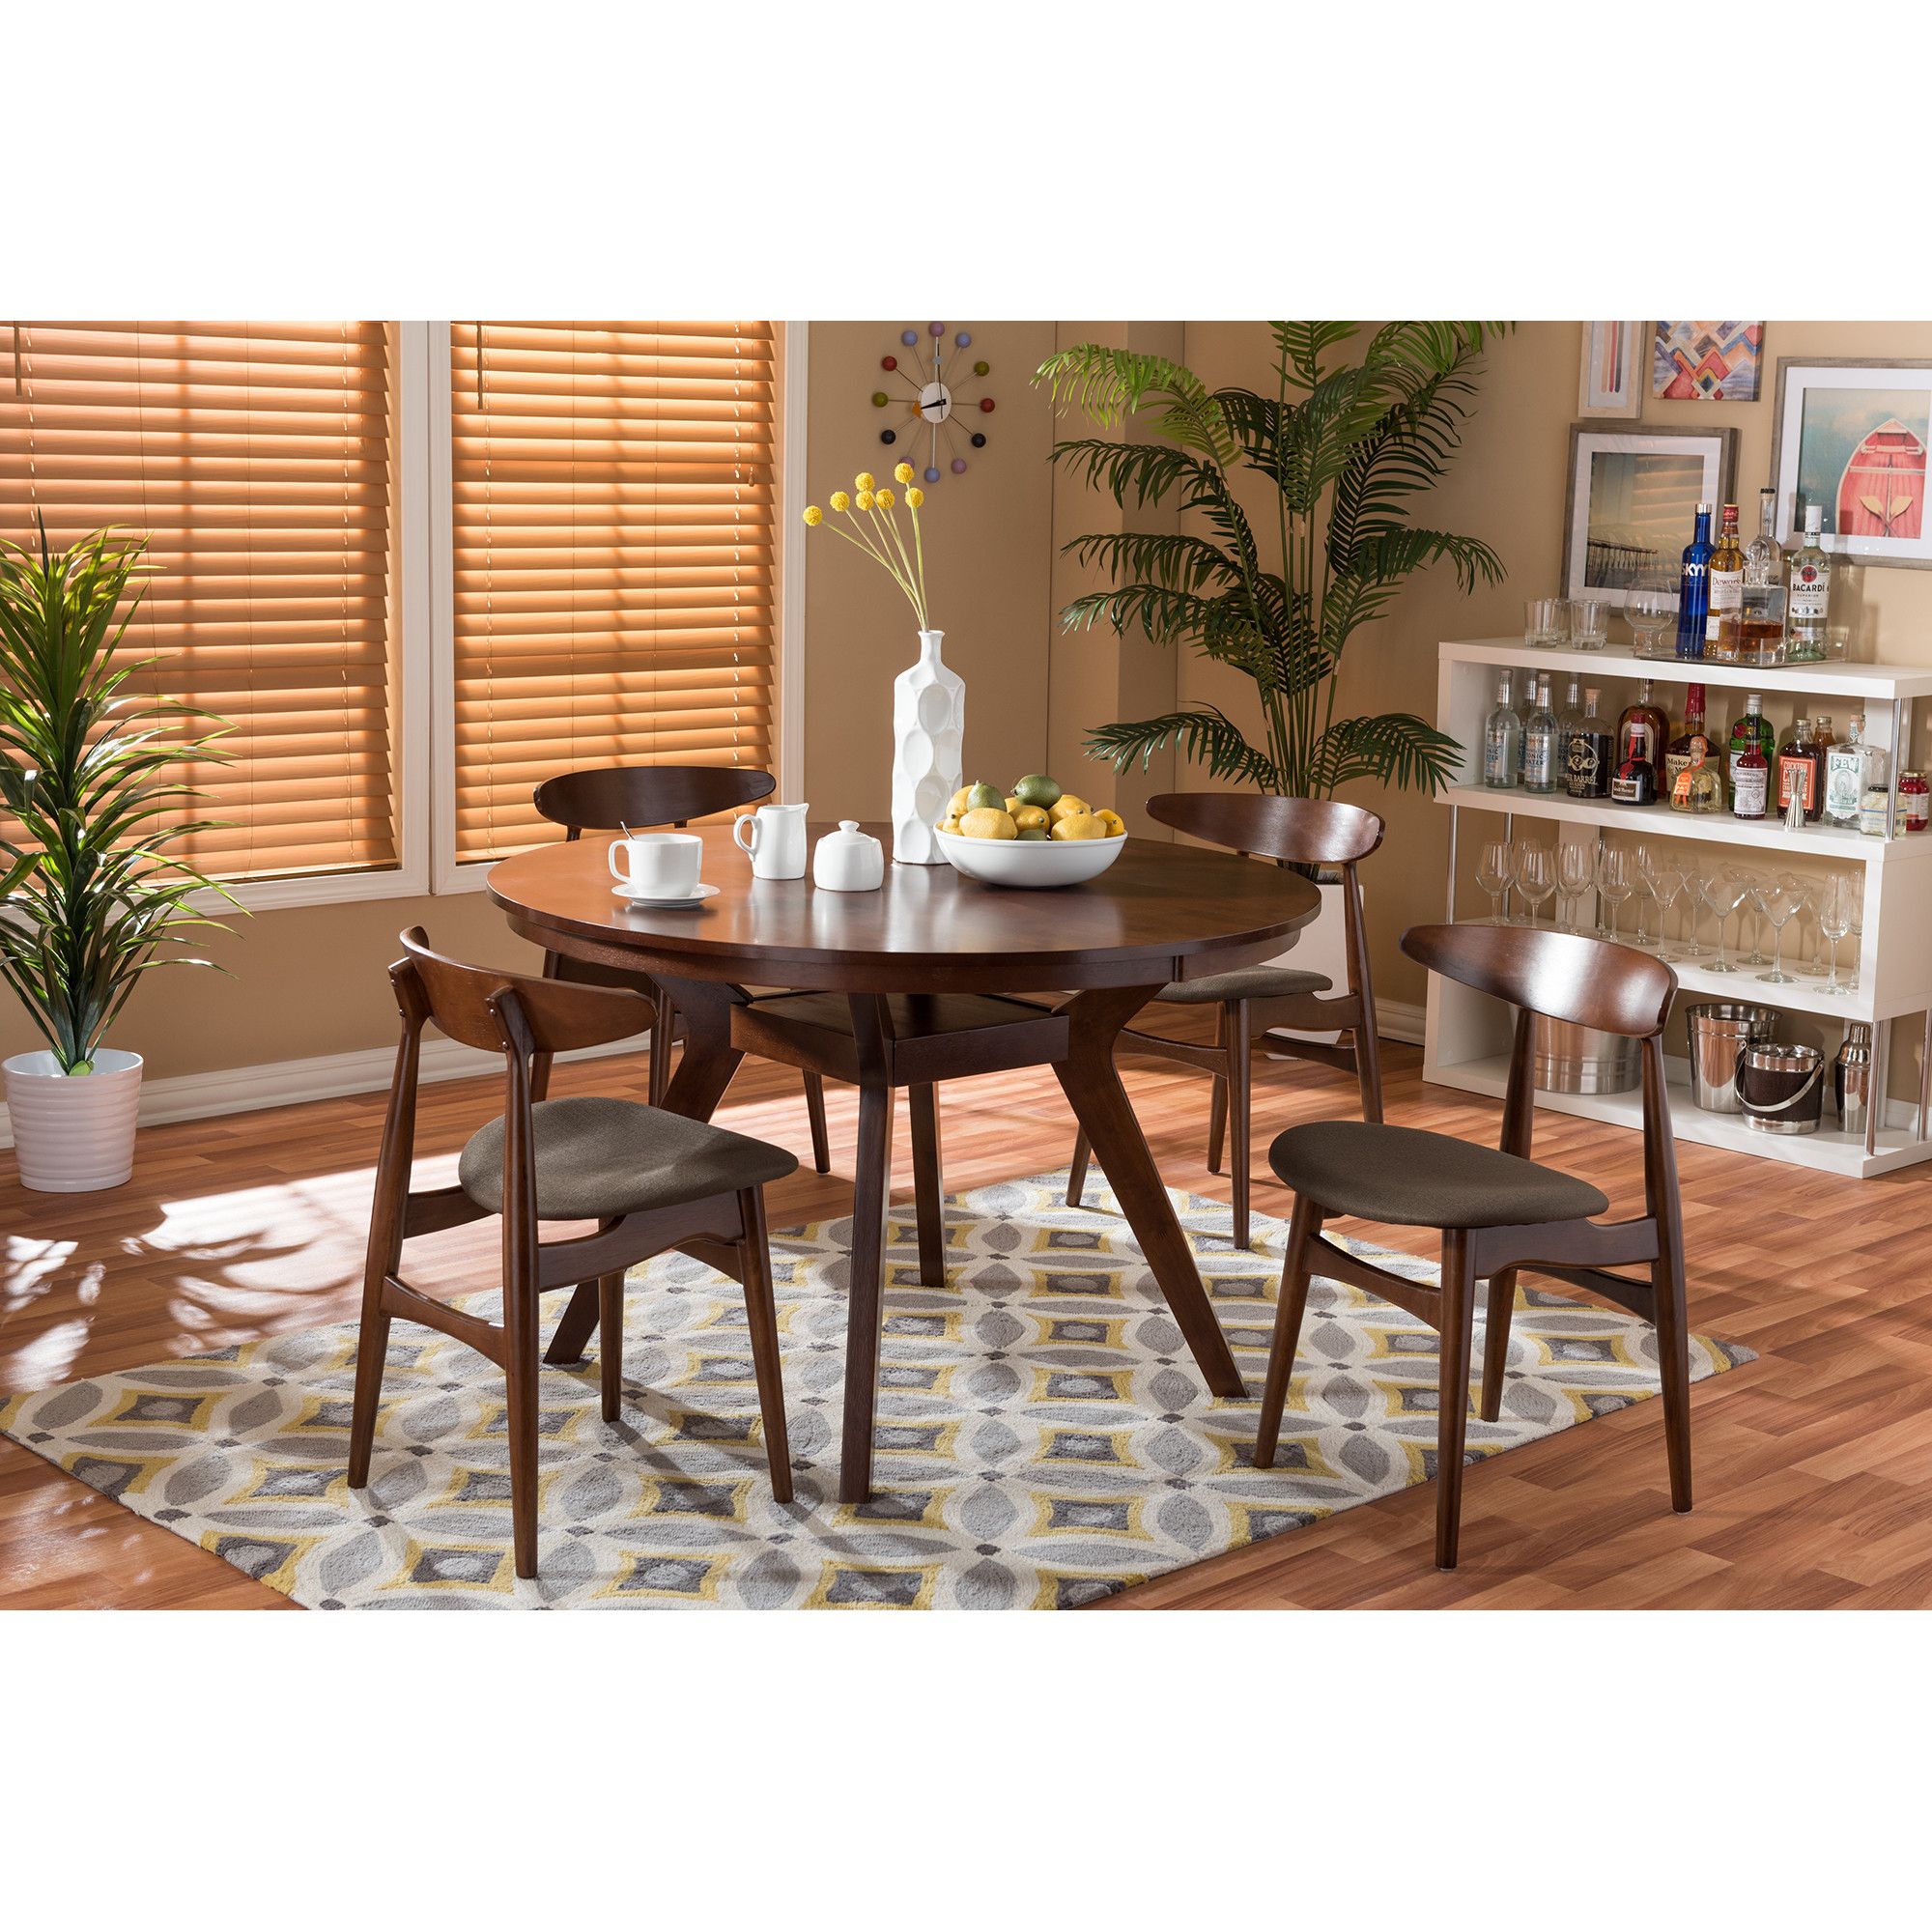 Baxton Studio Keitaro 5 Piece Dining Sets For Best And Newest Wholesale Dining Sets. Room Pier One. 2016 Antique Stackable Metal (Photo 1 of 20)